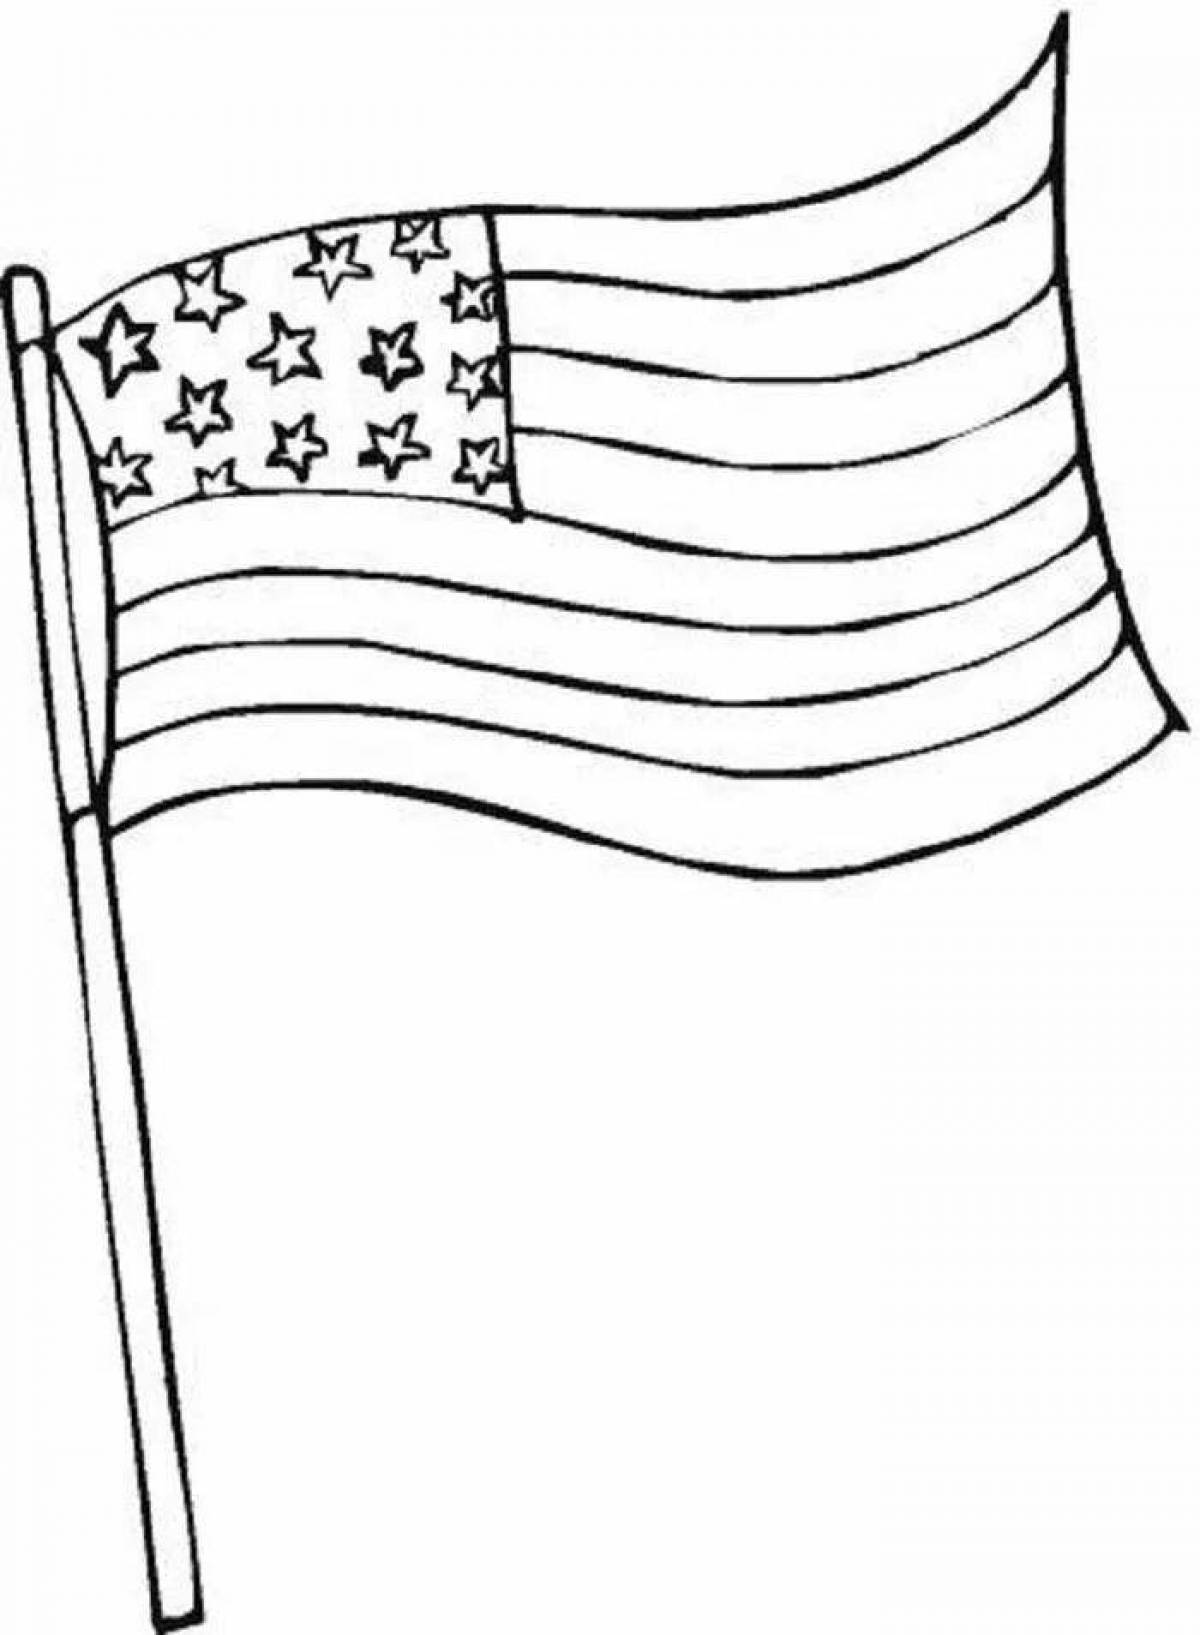 Fabulous flag coloring page for kids